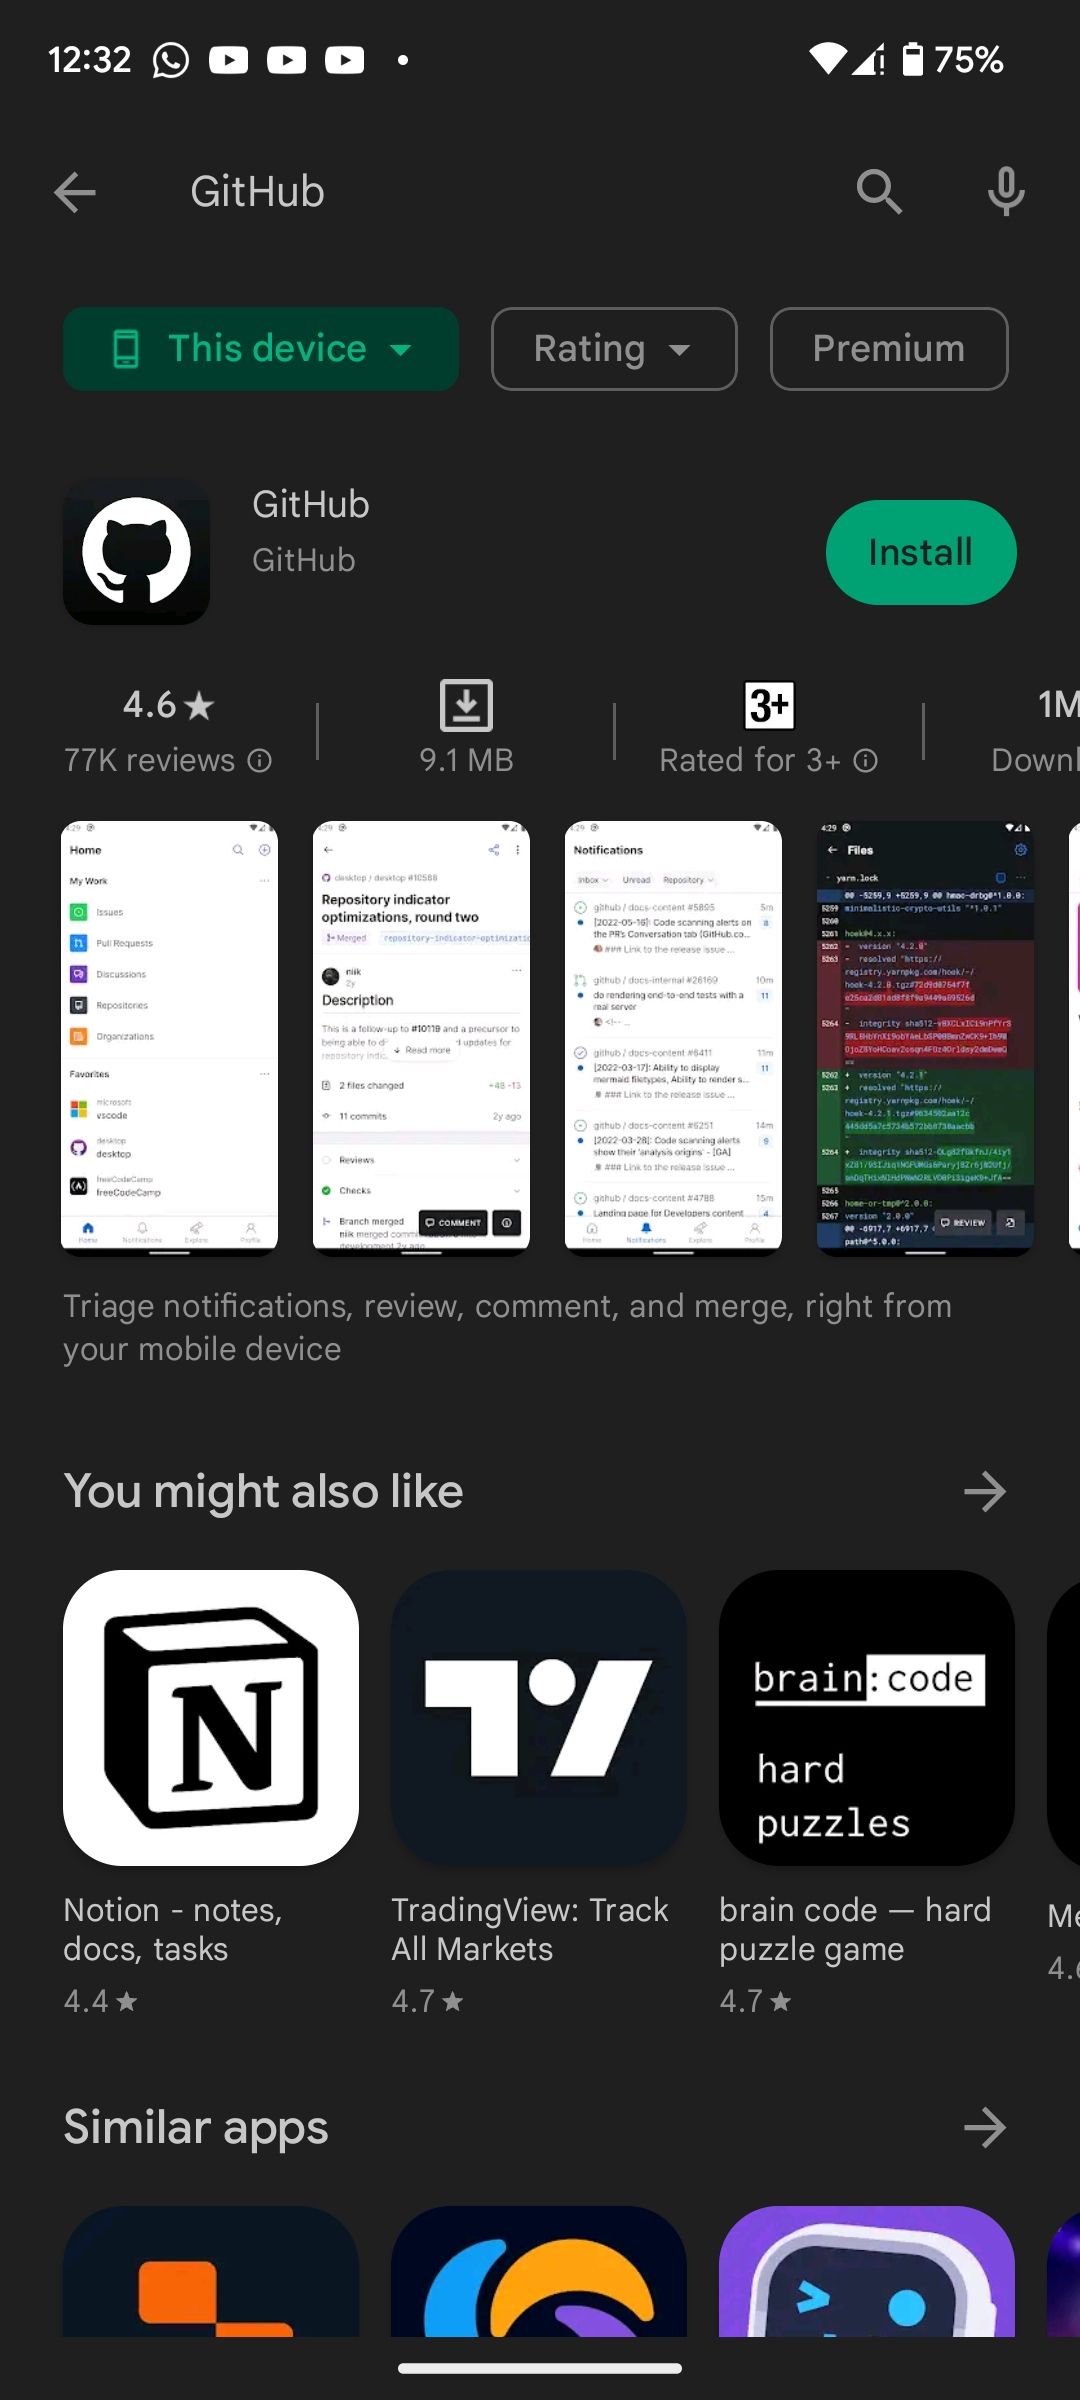 App results page in Google Play Store app